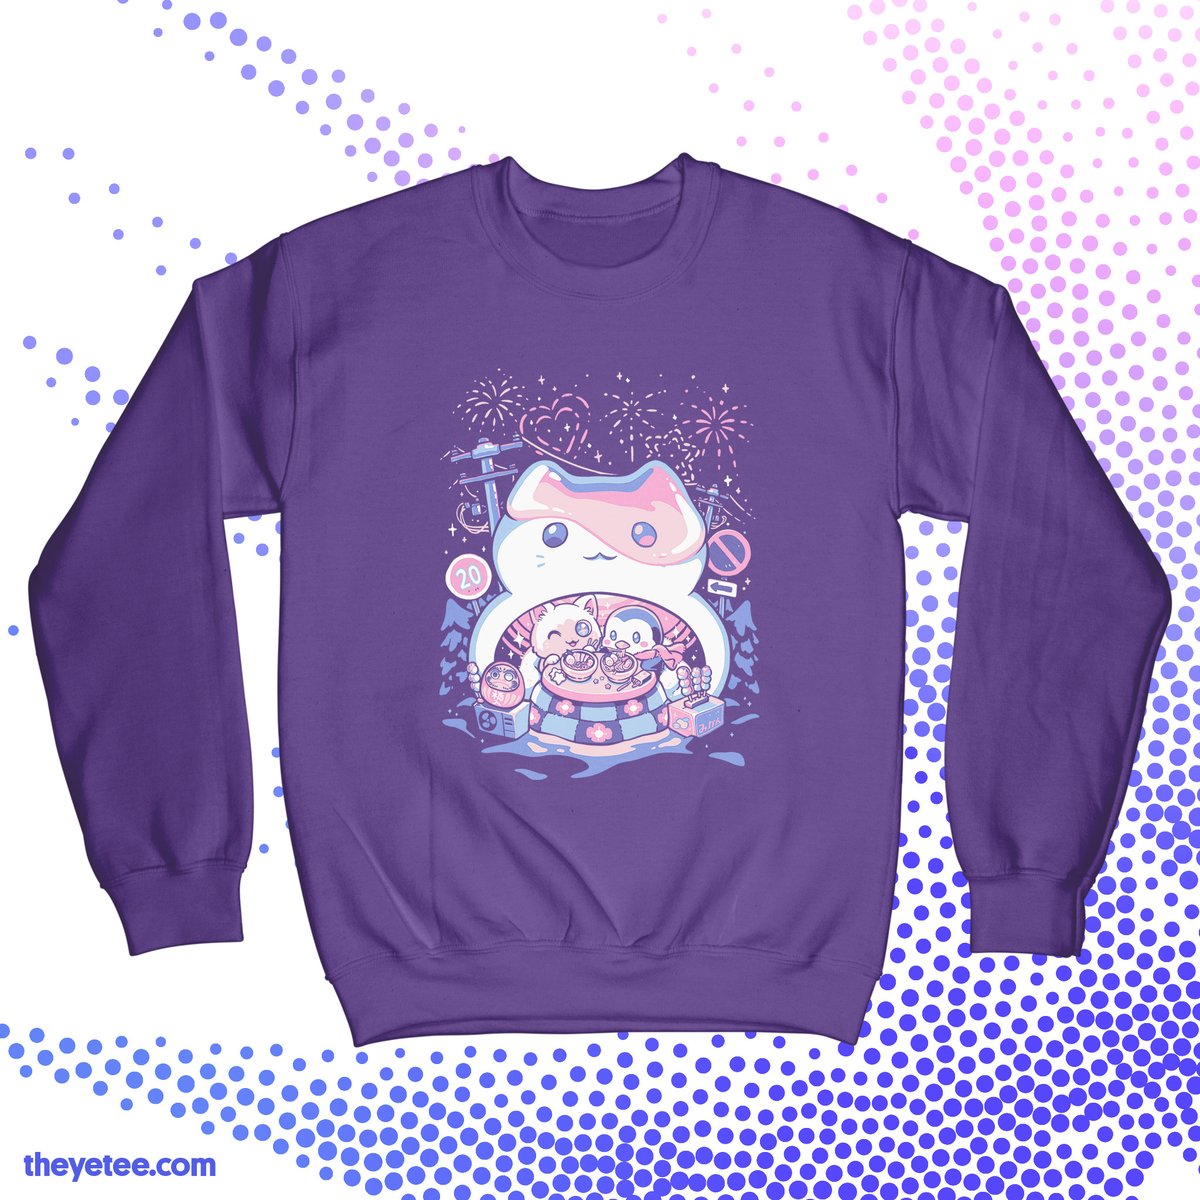 「This seems like the perfect way to hide 」|The Yetee 🌈のイラスト